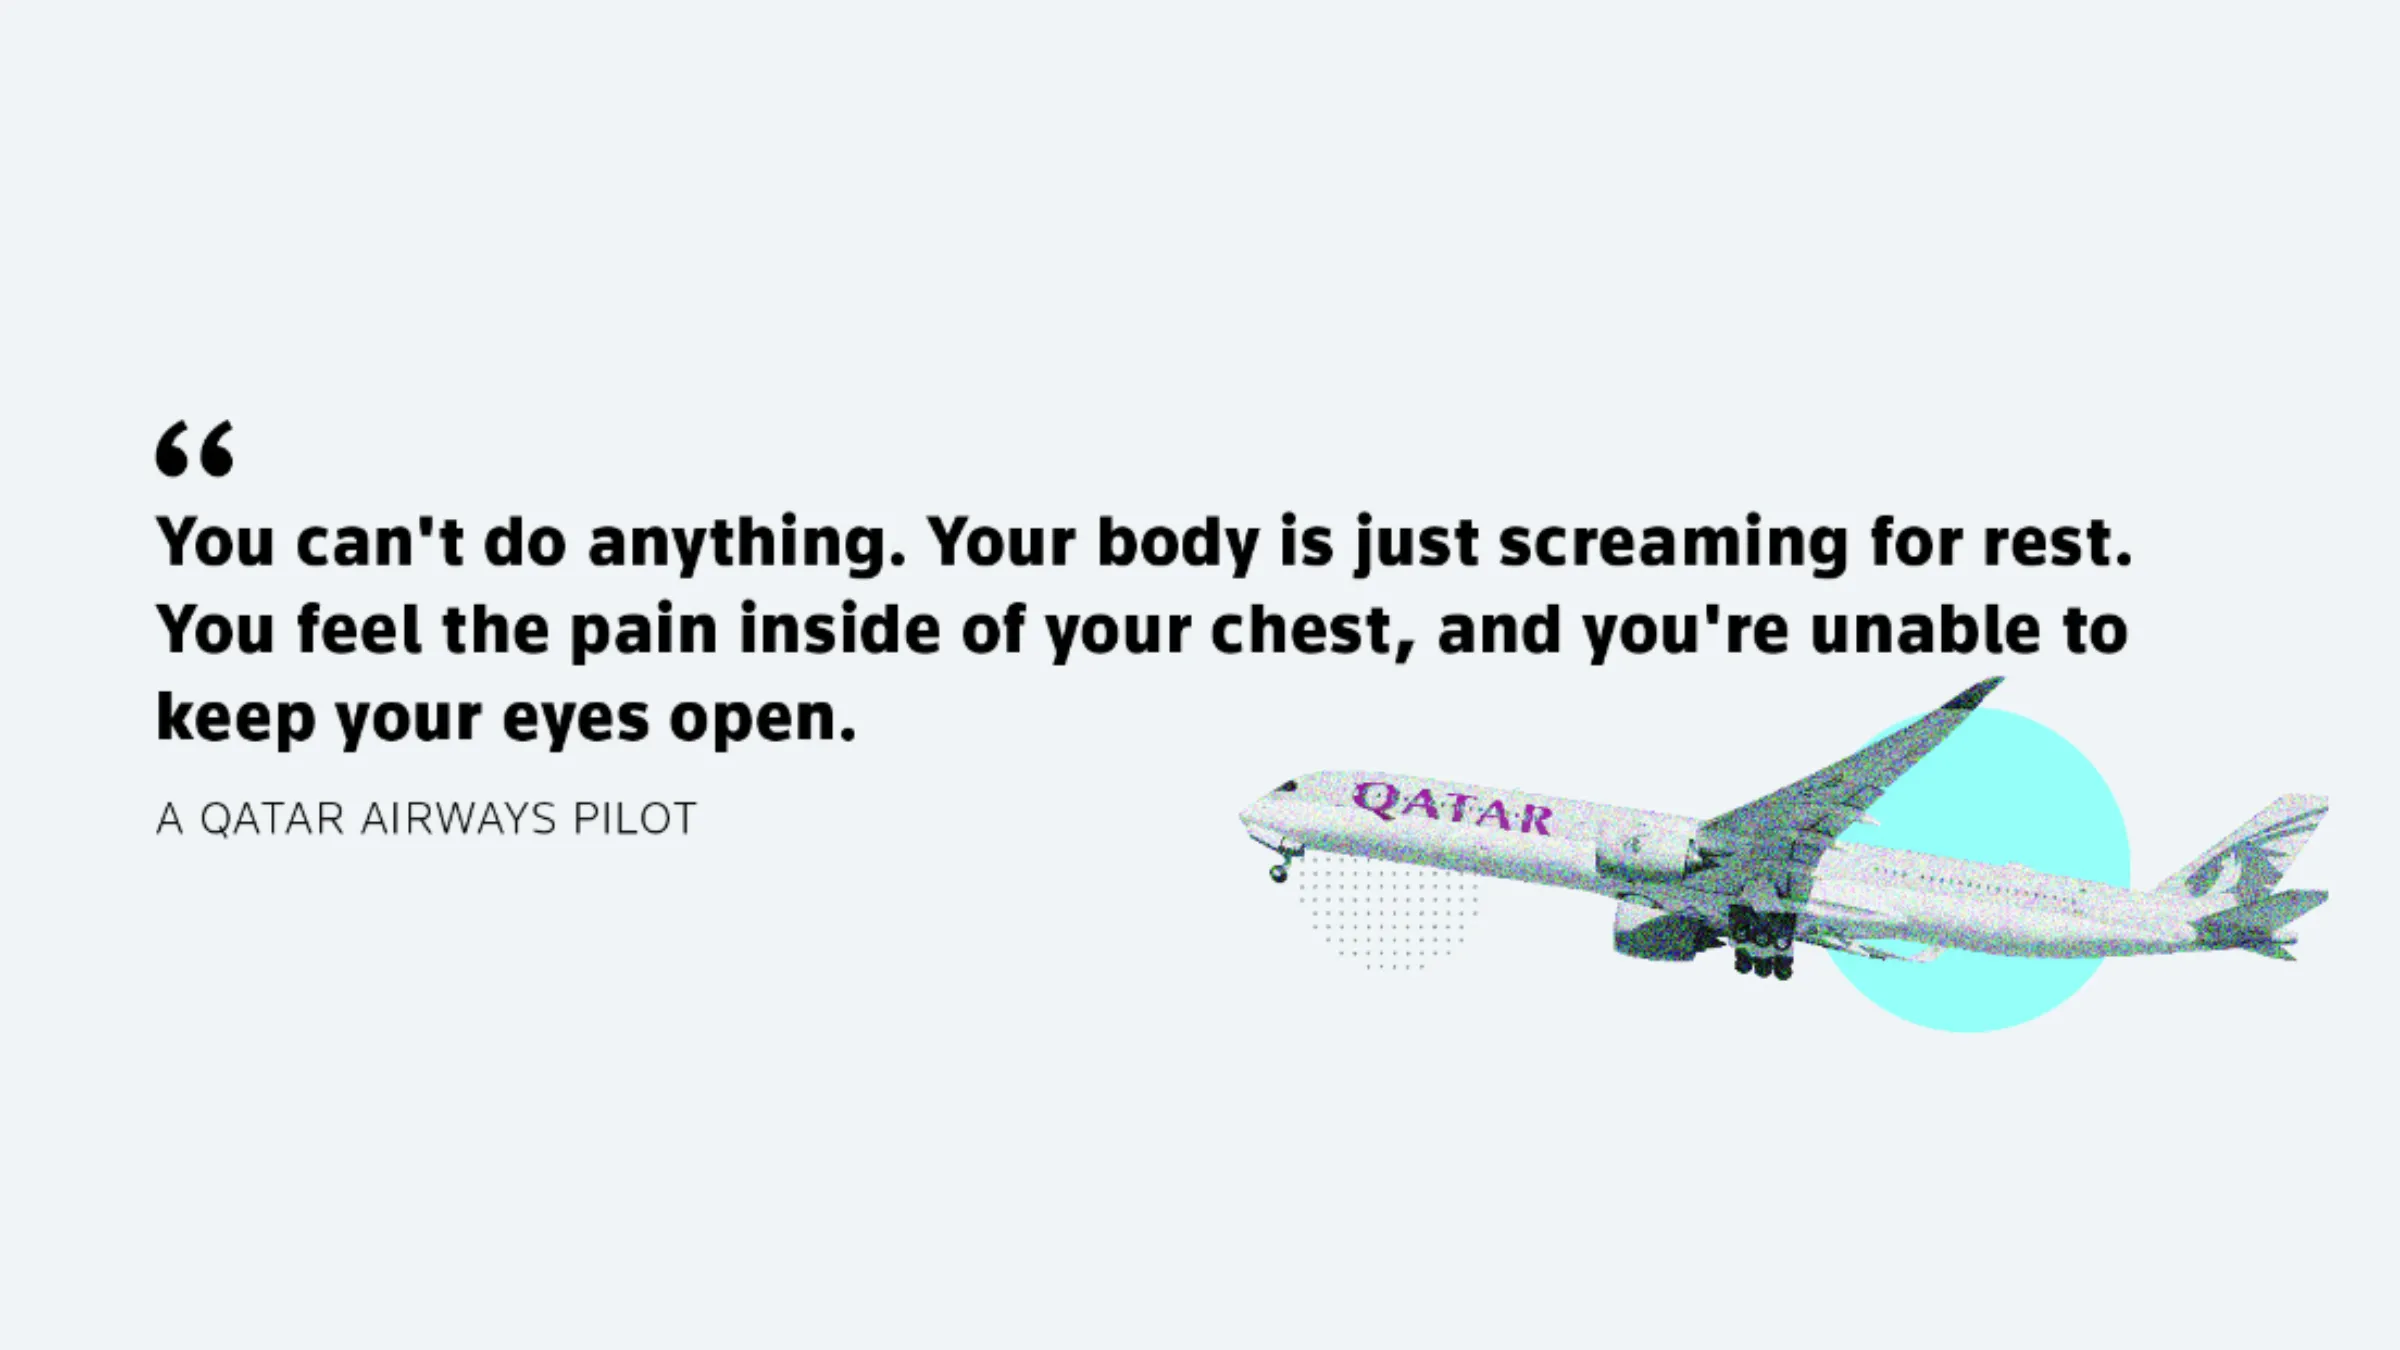 An illustration displaying a Qatar airways plane and a quote from an anonymous Qatar Airways pilot. The text reads: 'You can't do anything. Your body is just screaming for rest. You feel the pain inside of your chest, and you're unable to keep your eyes open.' - A Qatar Airways pilot